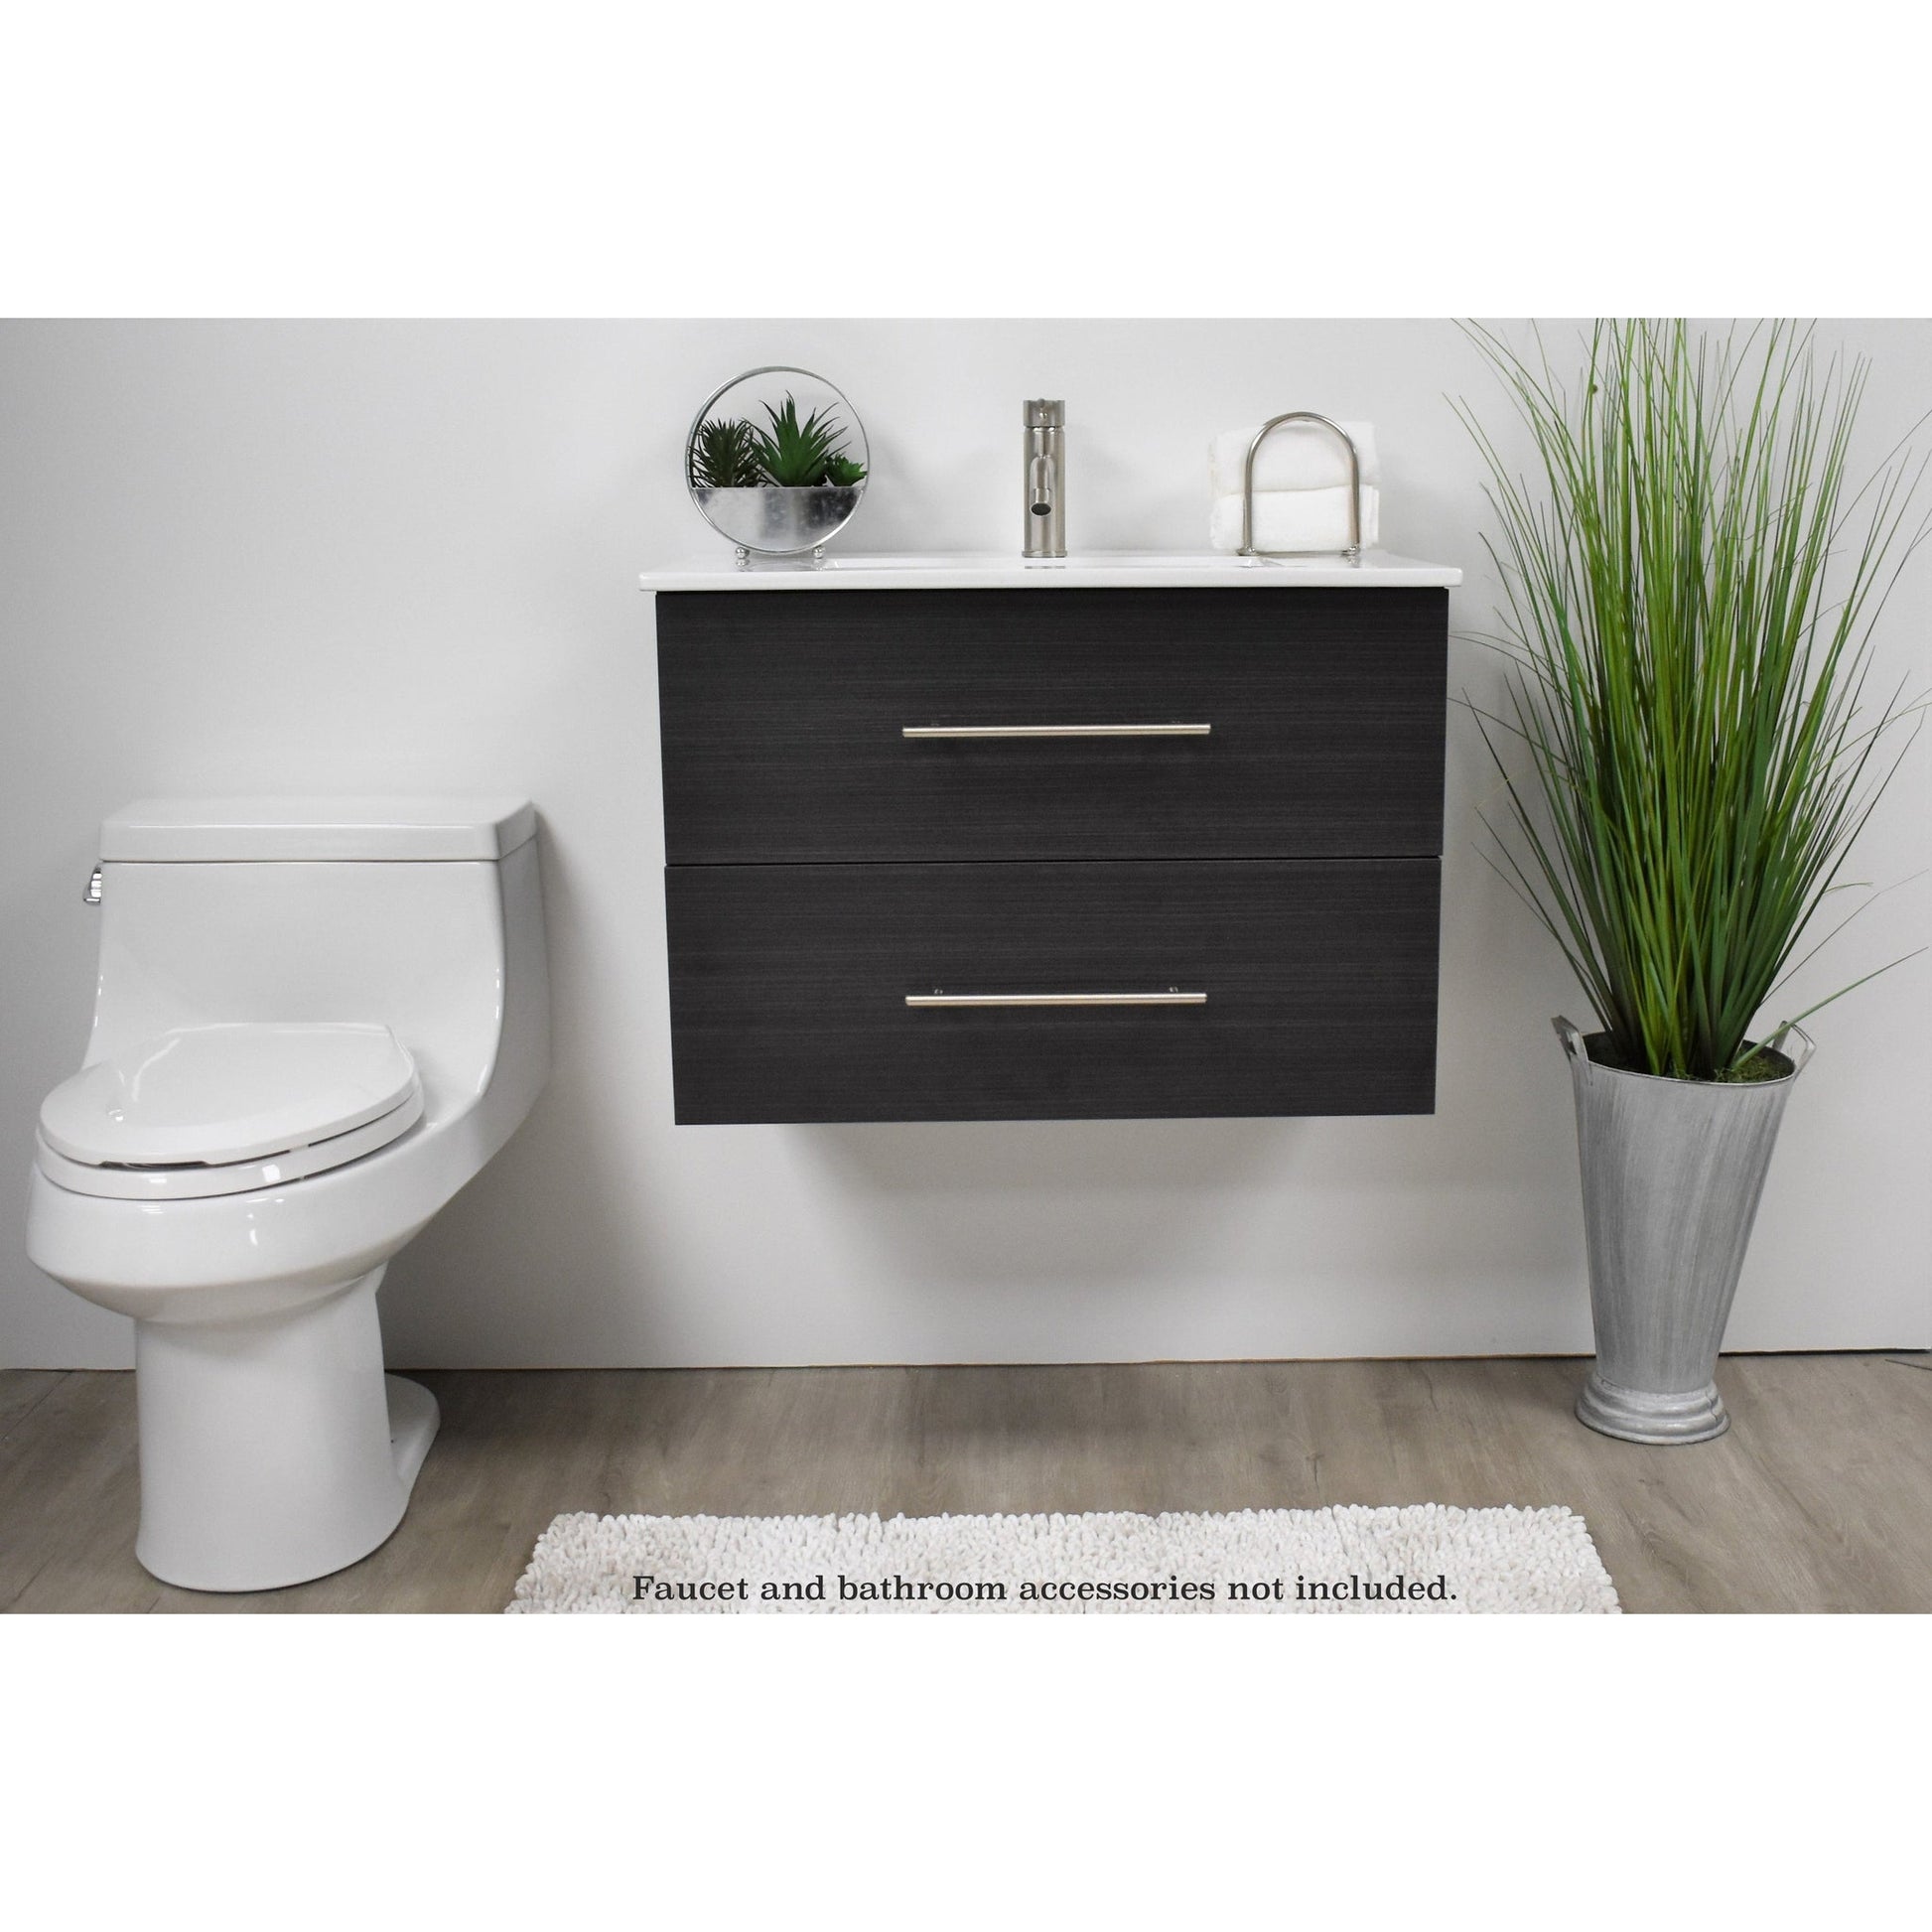 Volpa USA Napa 24" Black Ash Wall-Mounted Floating Modern Bathroom Vanity With Integrated Ceramic Top and Satin Nickel Round Handles